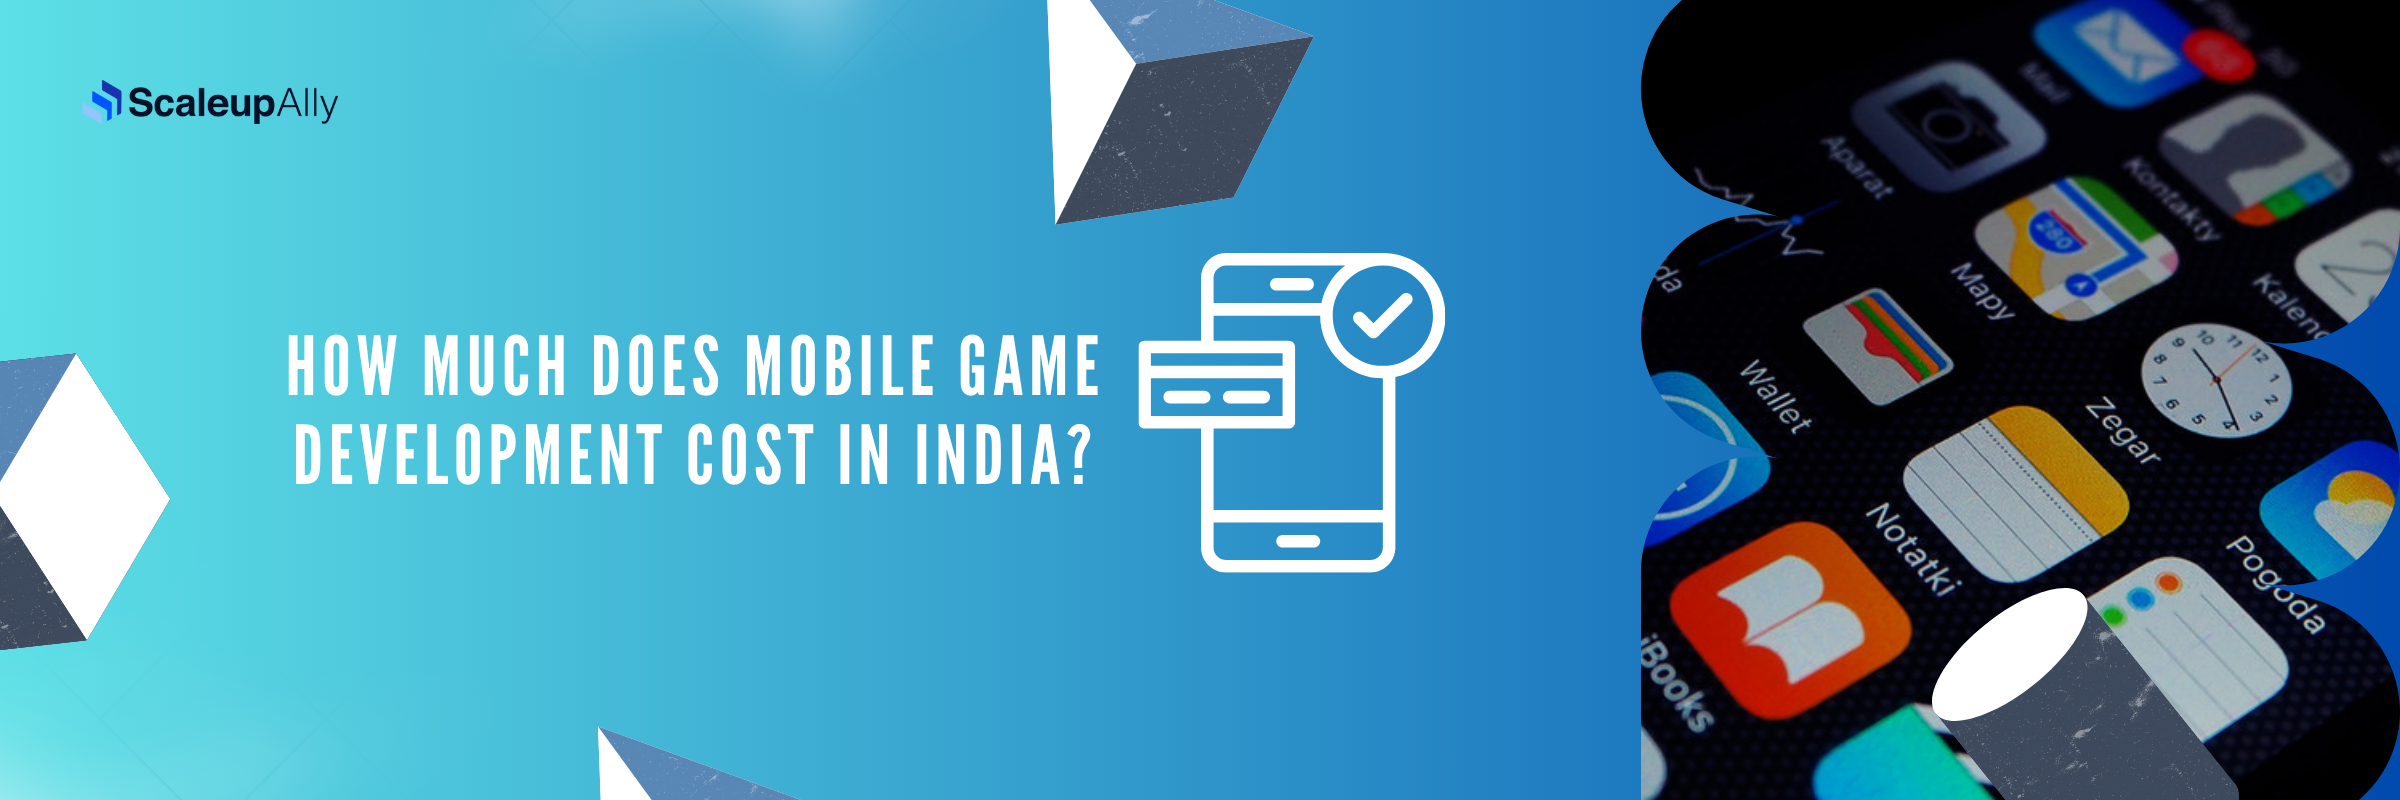 How Much Mobile Game Development Cost in India?